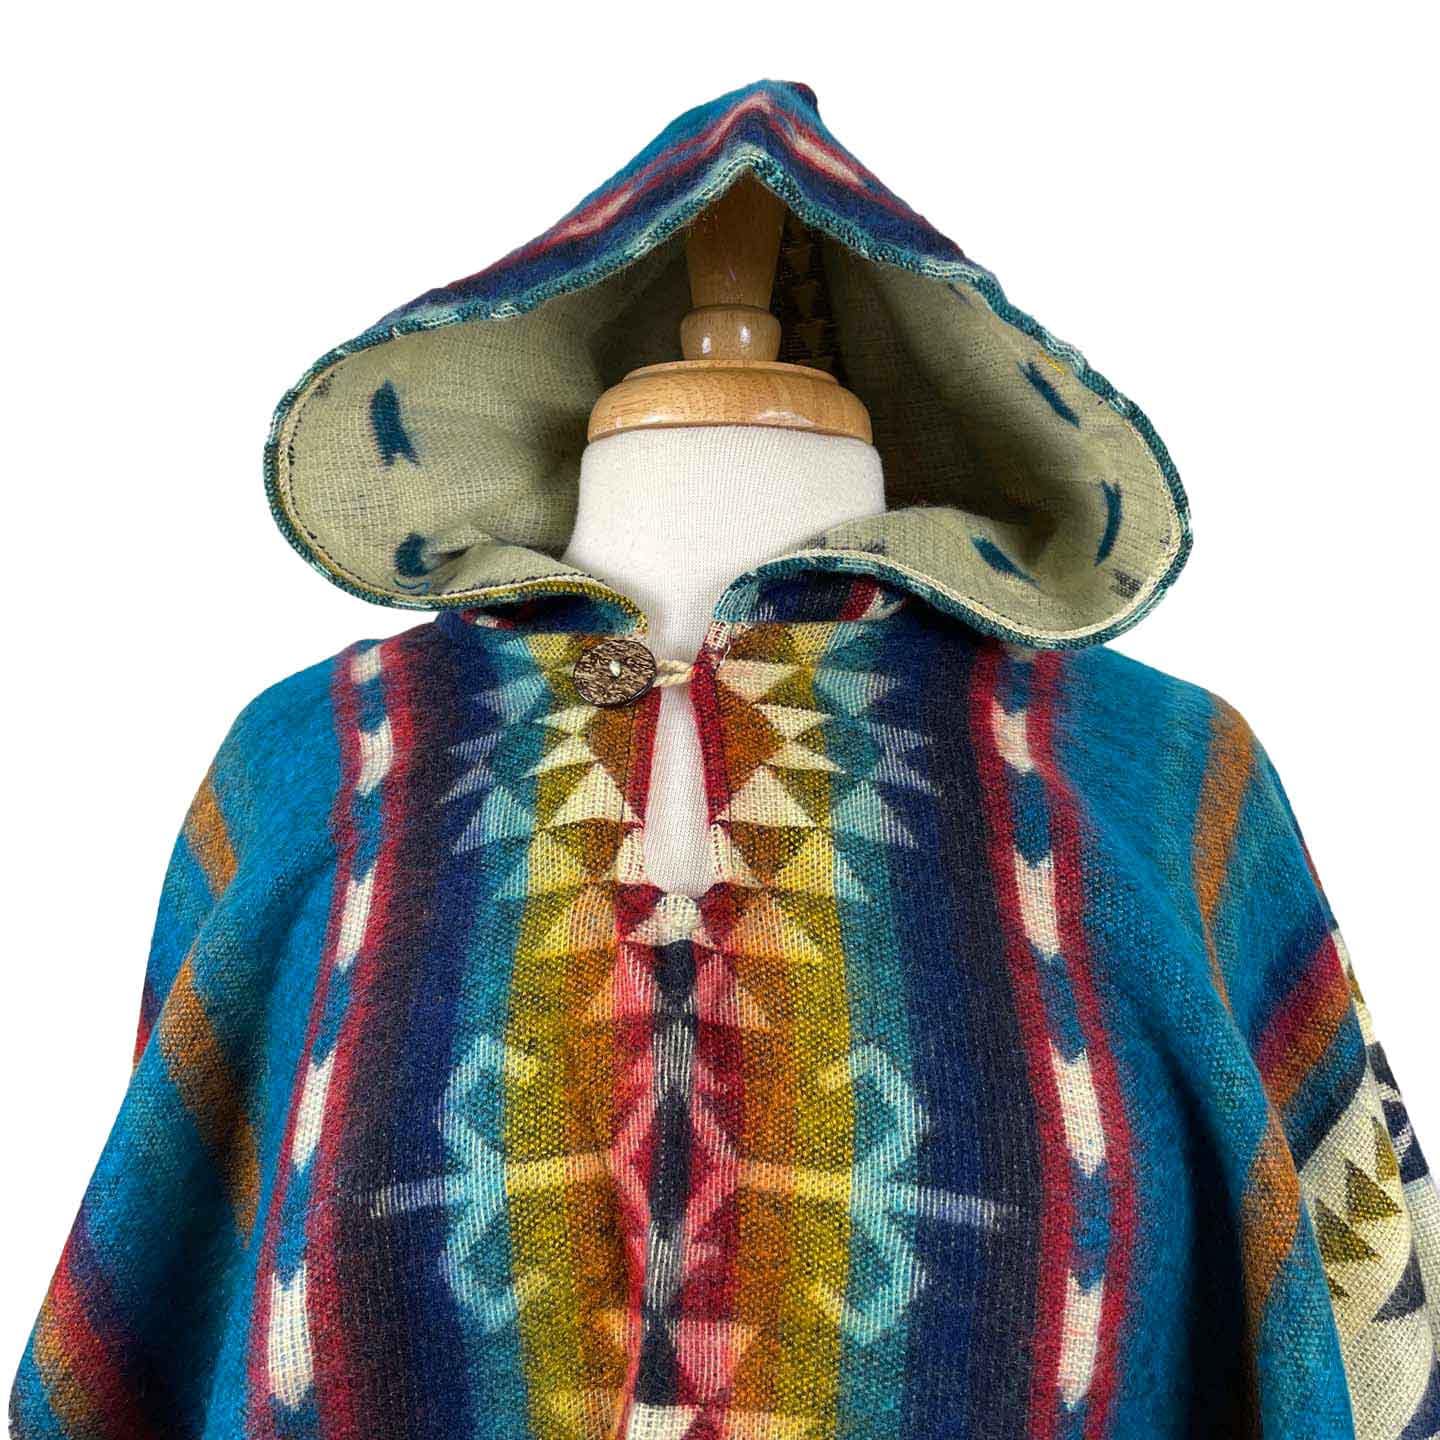 Soft & Cozy Hooded Poncho Coat | Teal Colorful Beige